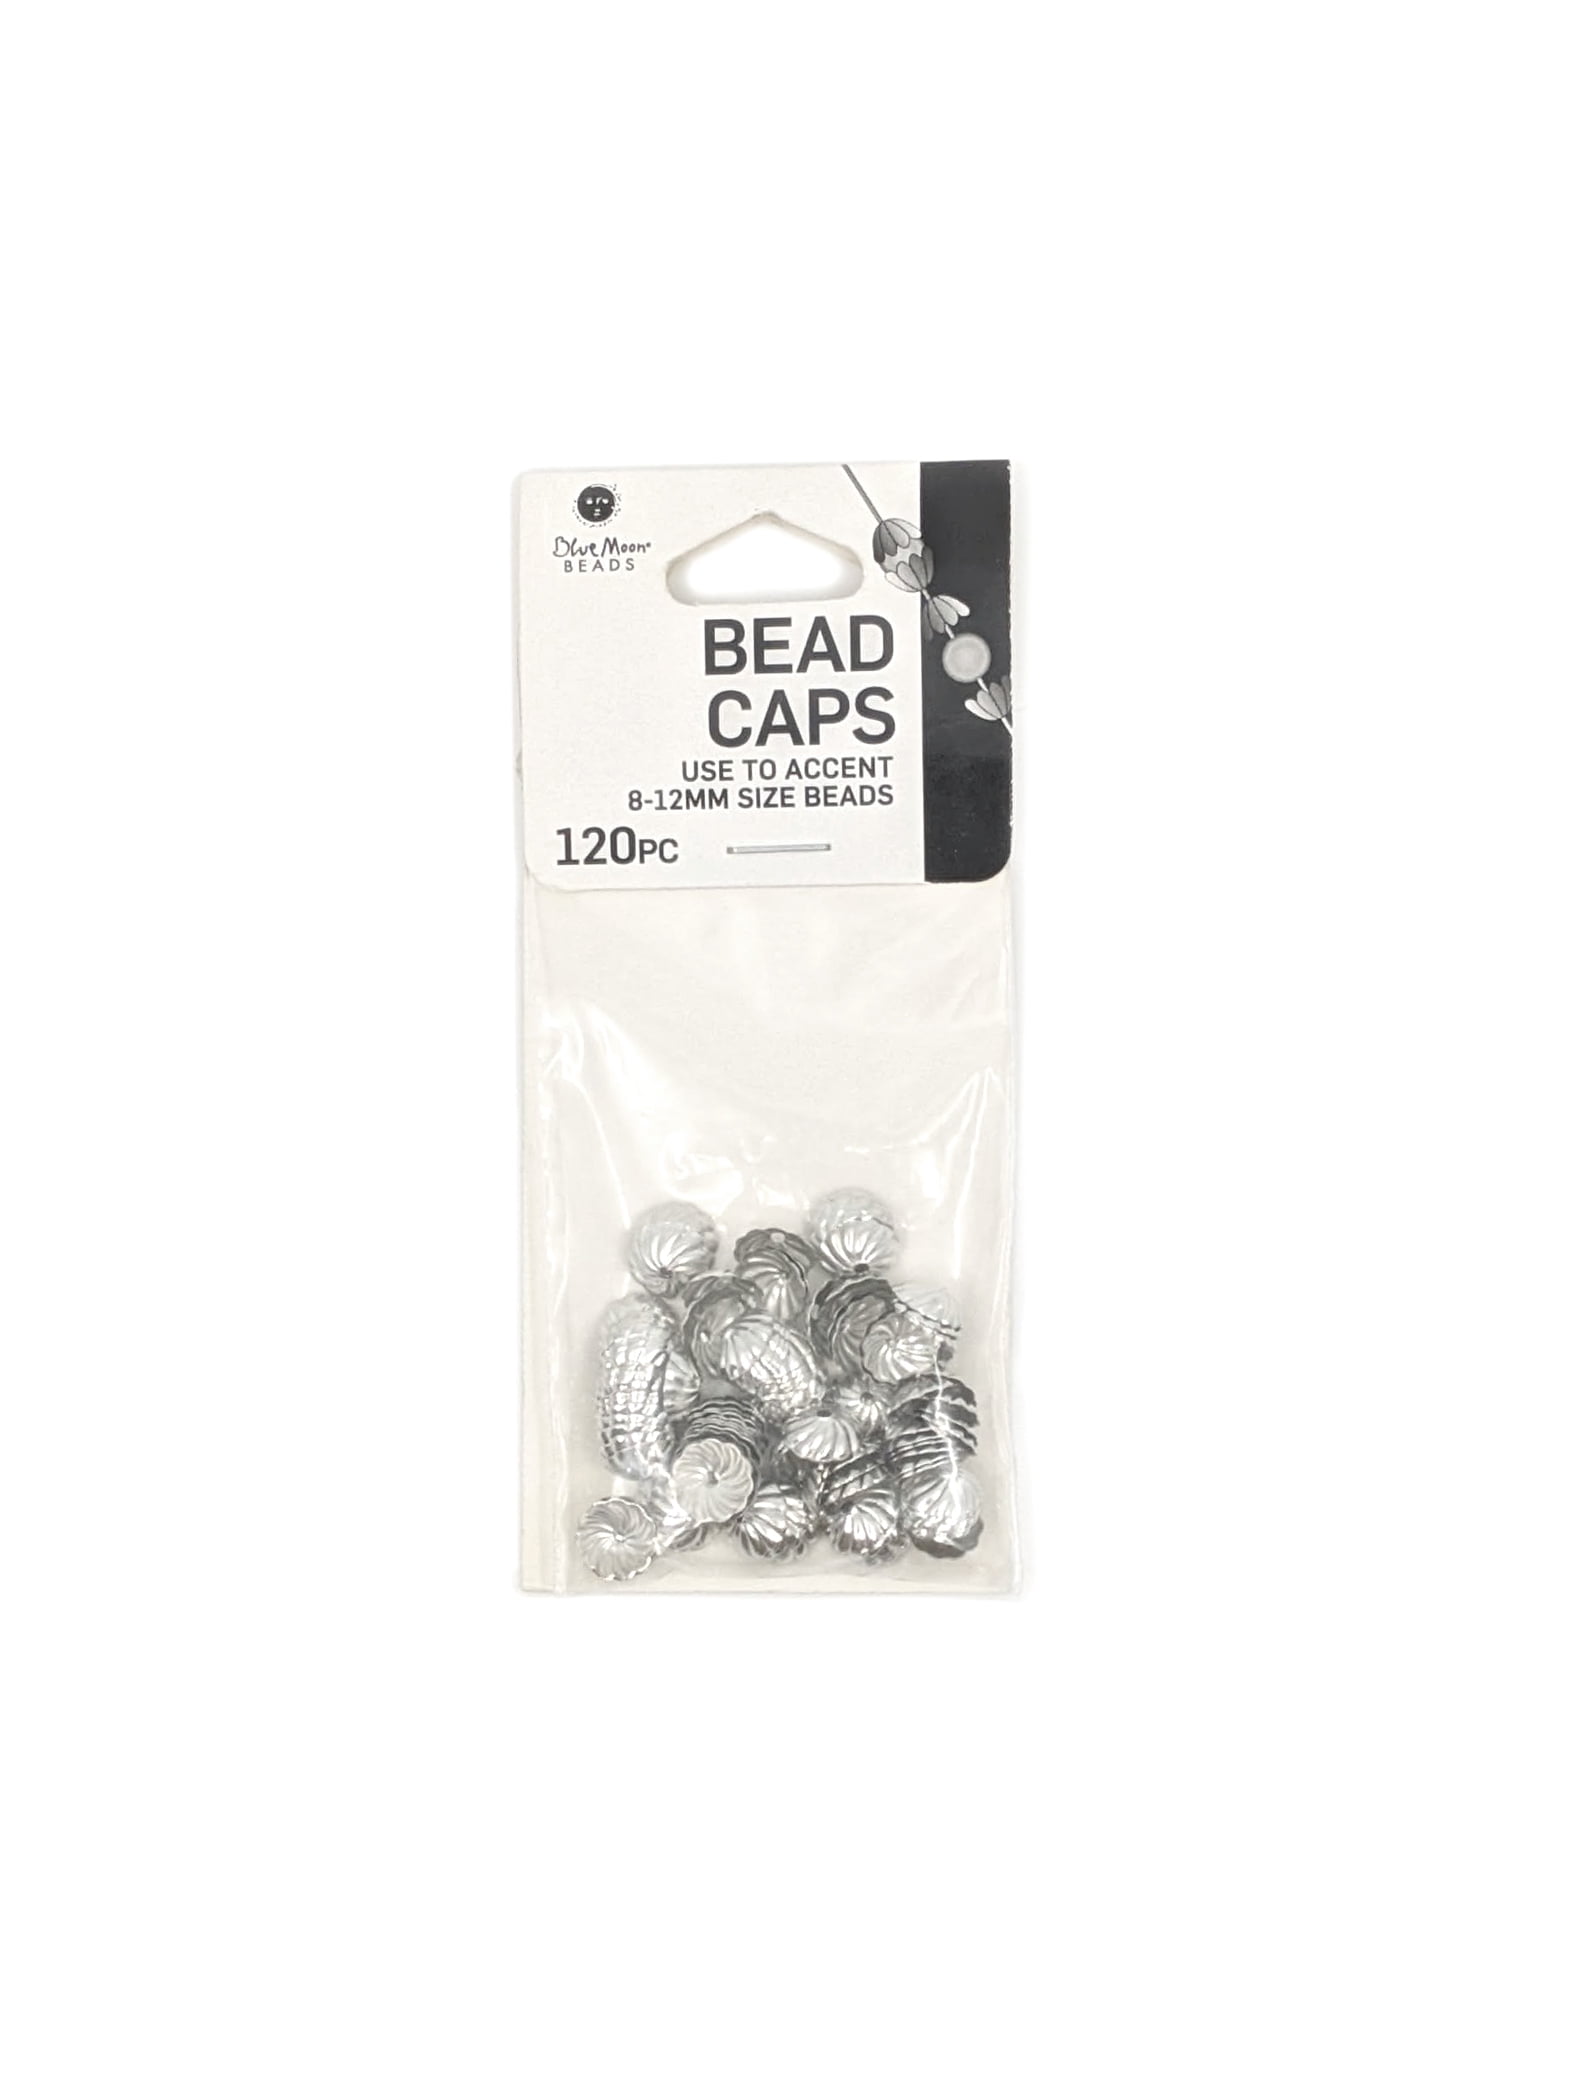 Blue Moon Beads Silver Metal Swirl Multipack Spacer Cap Beads, 120 Piece